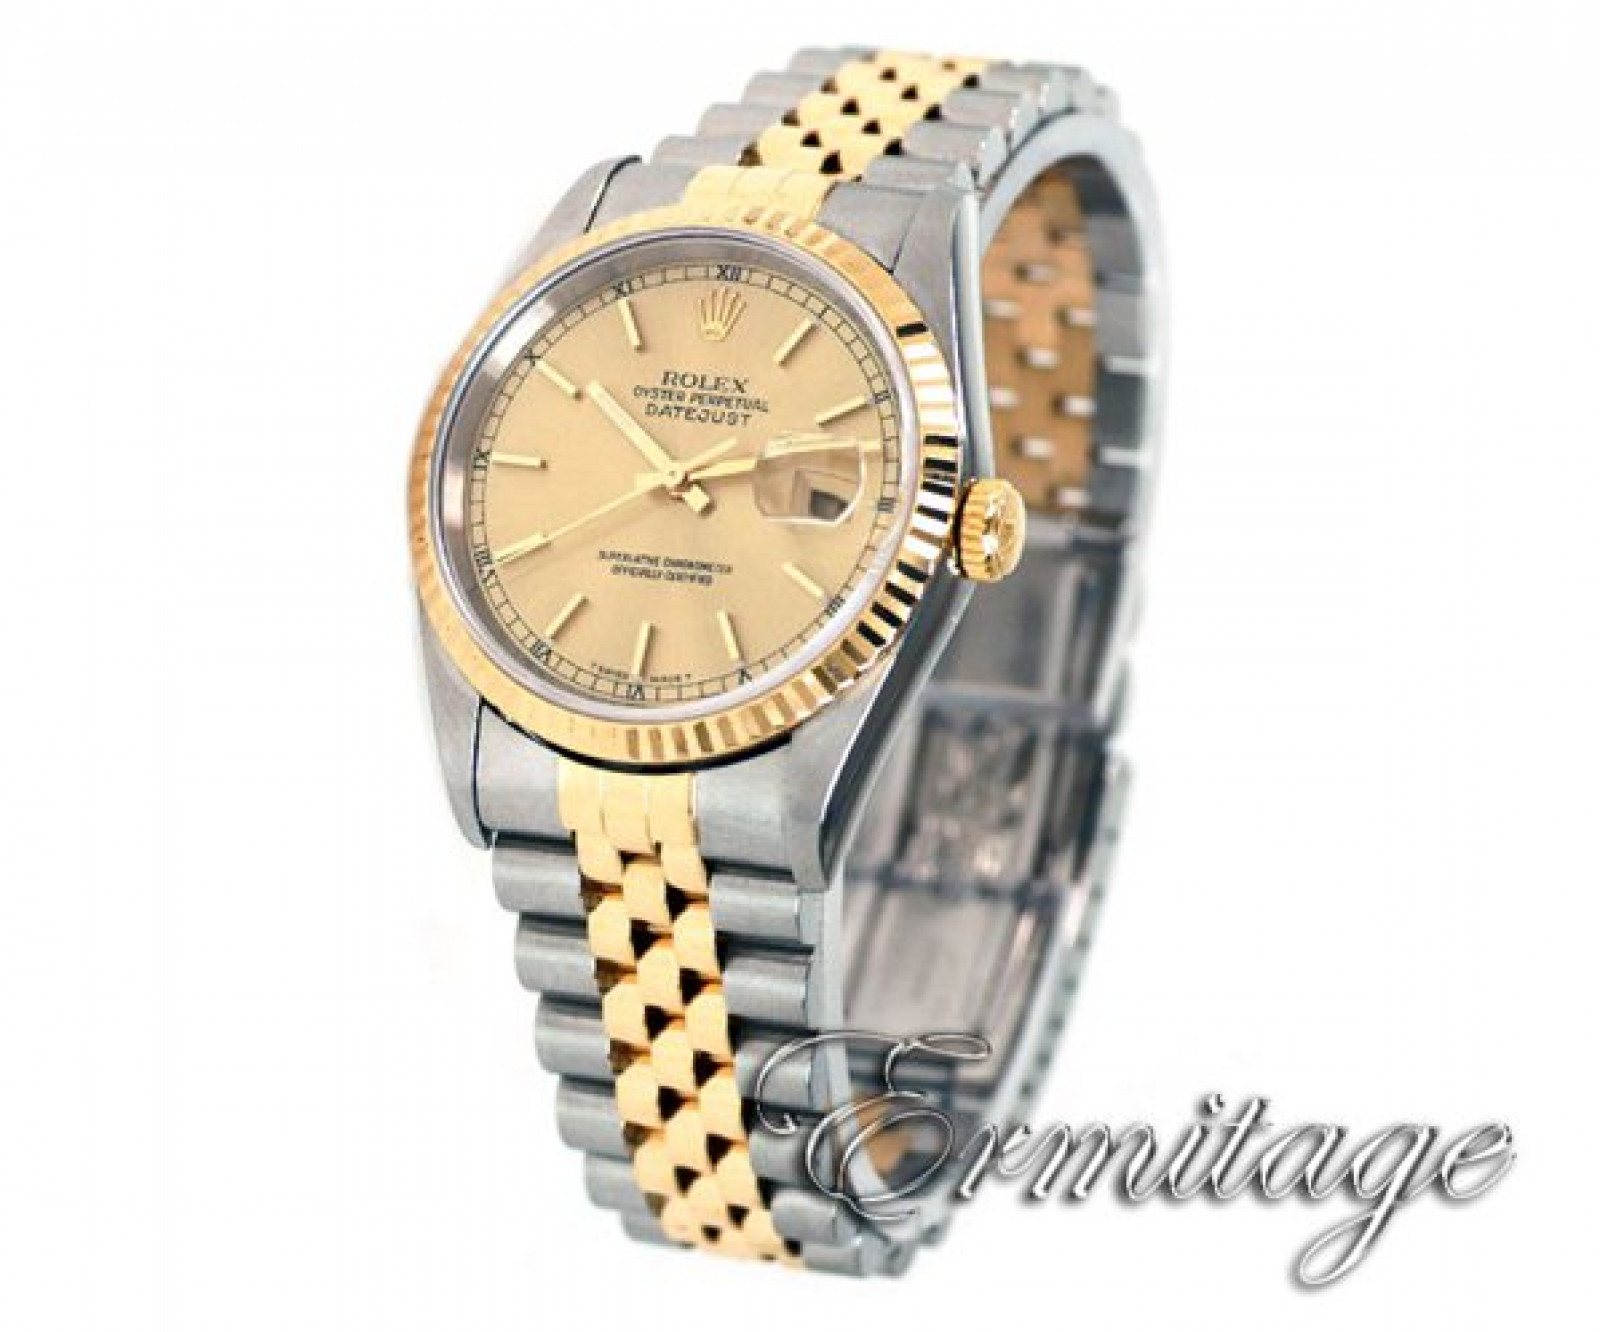 Rolex Datejust 16233 Oyster Perpetual 1997